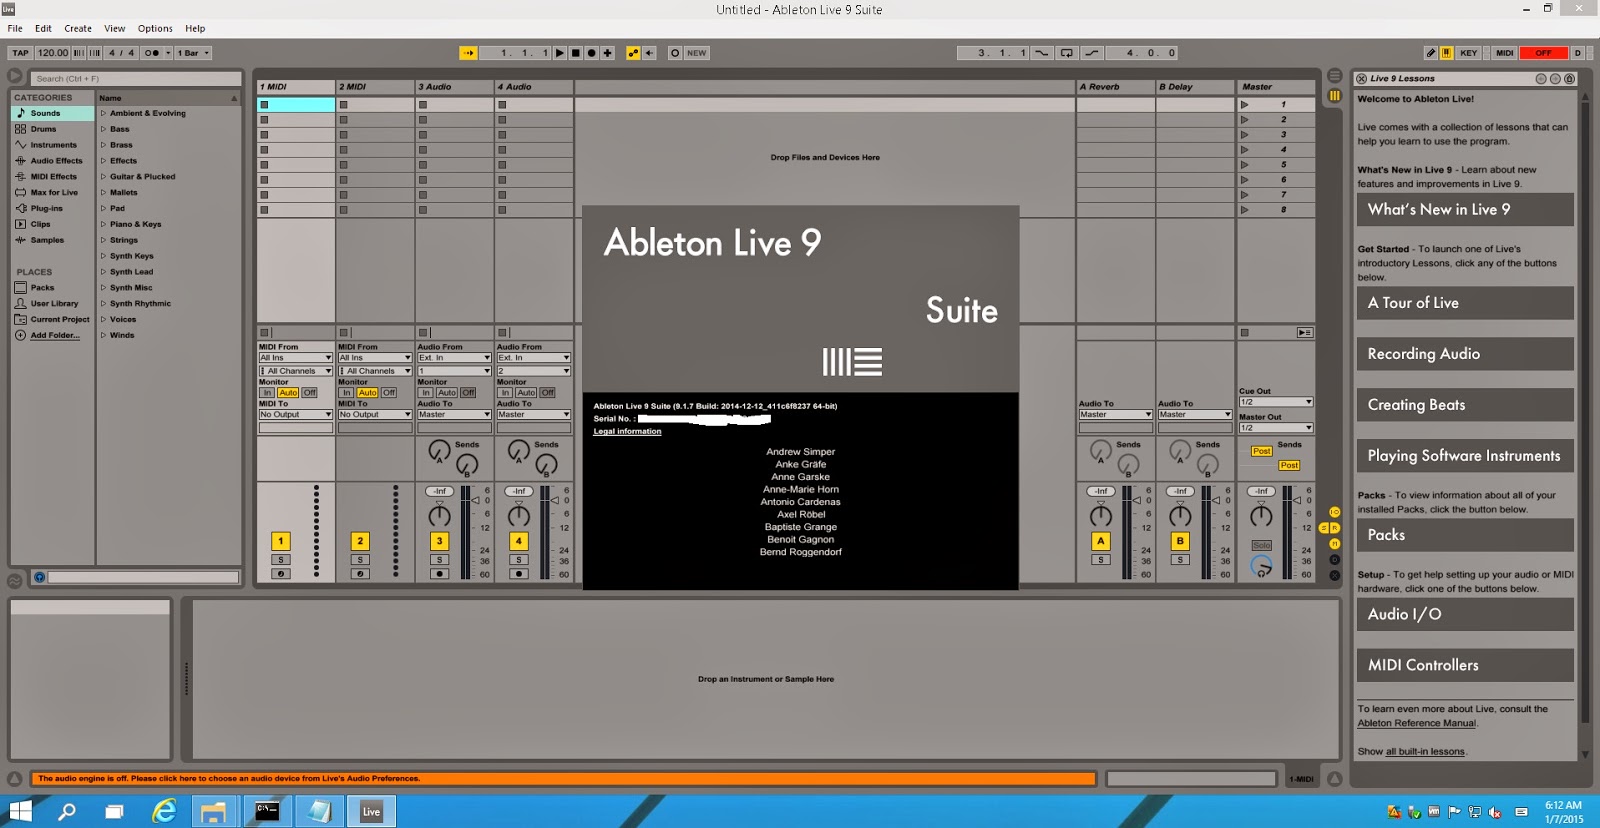 update os x to 10.11 ableton live 9.7.5